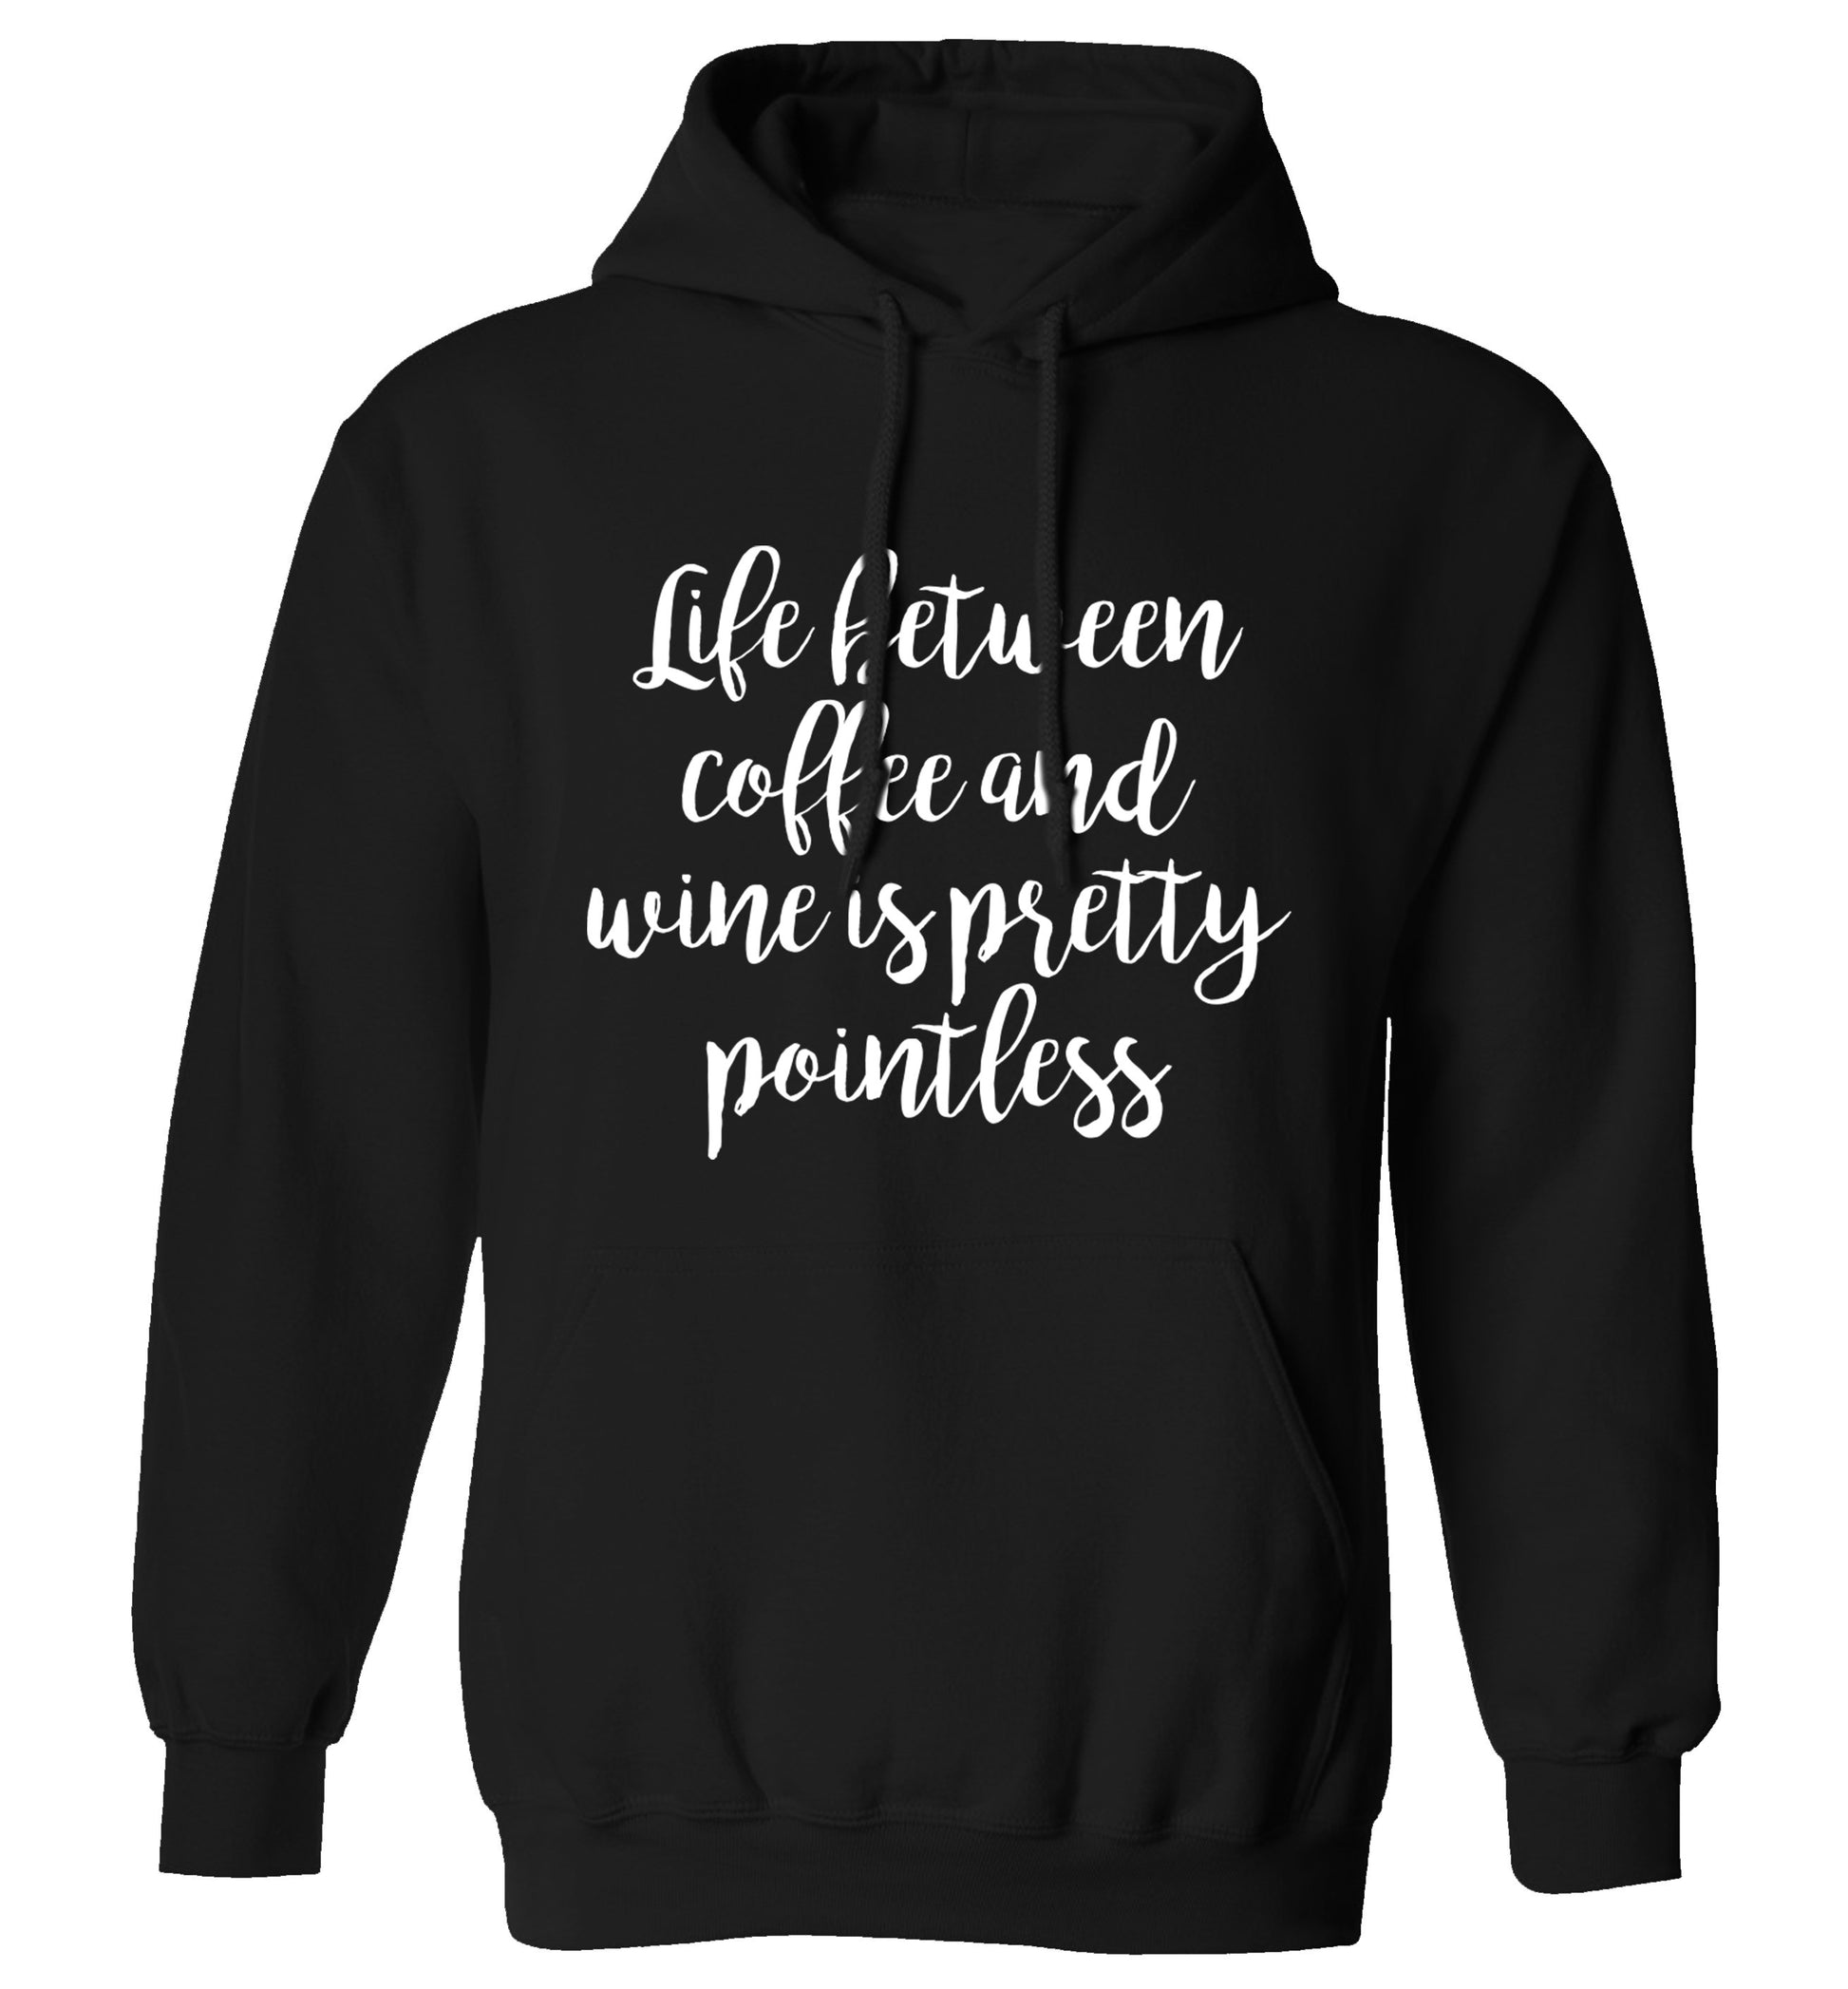 Life between coffee and wine is pretty pointless adults unisex black hoodie 2XL